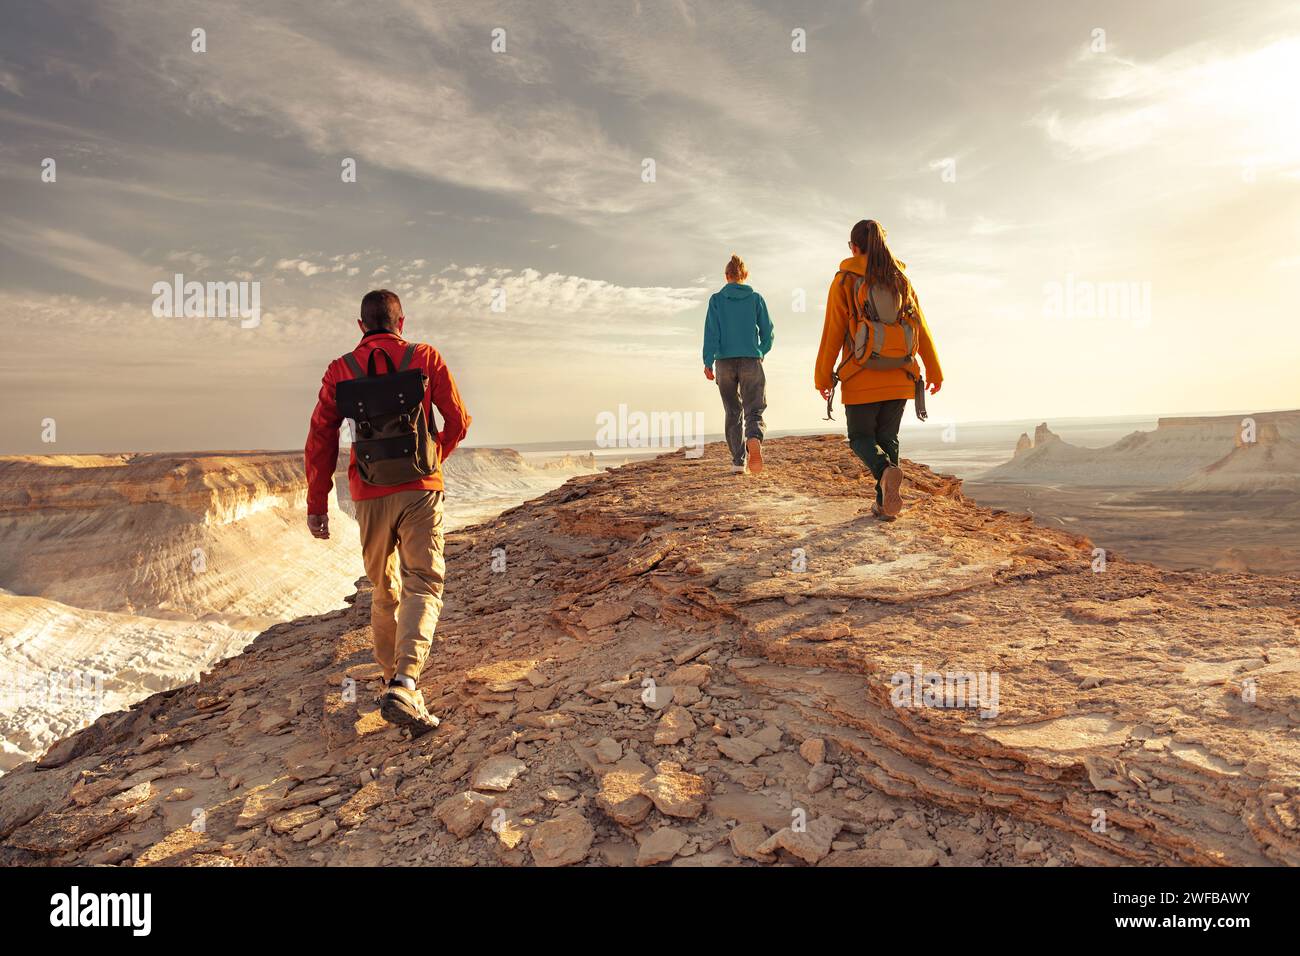 Three young tourists with backpacks are walking at sunset mountain top with awesome view Stock Photo